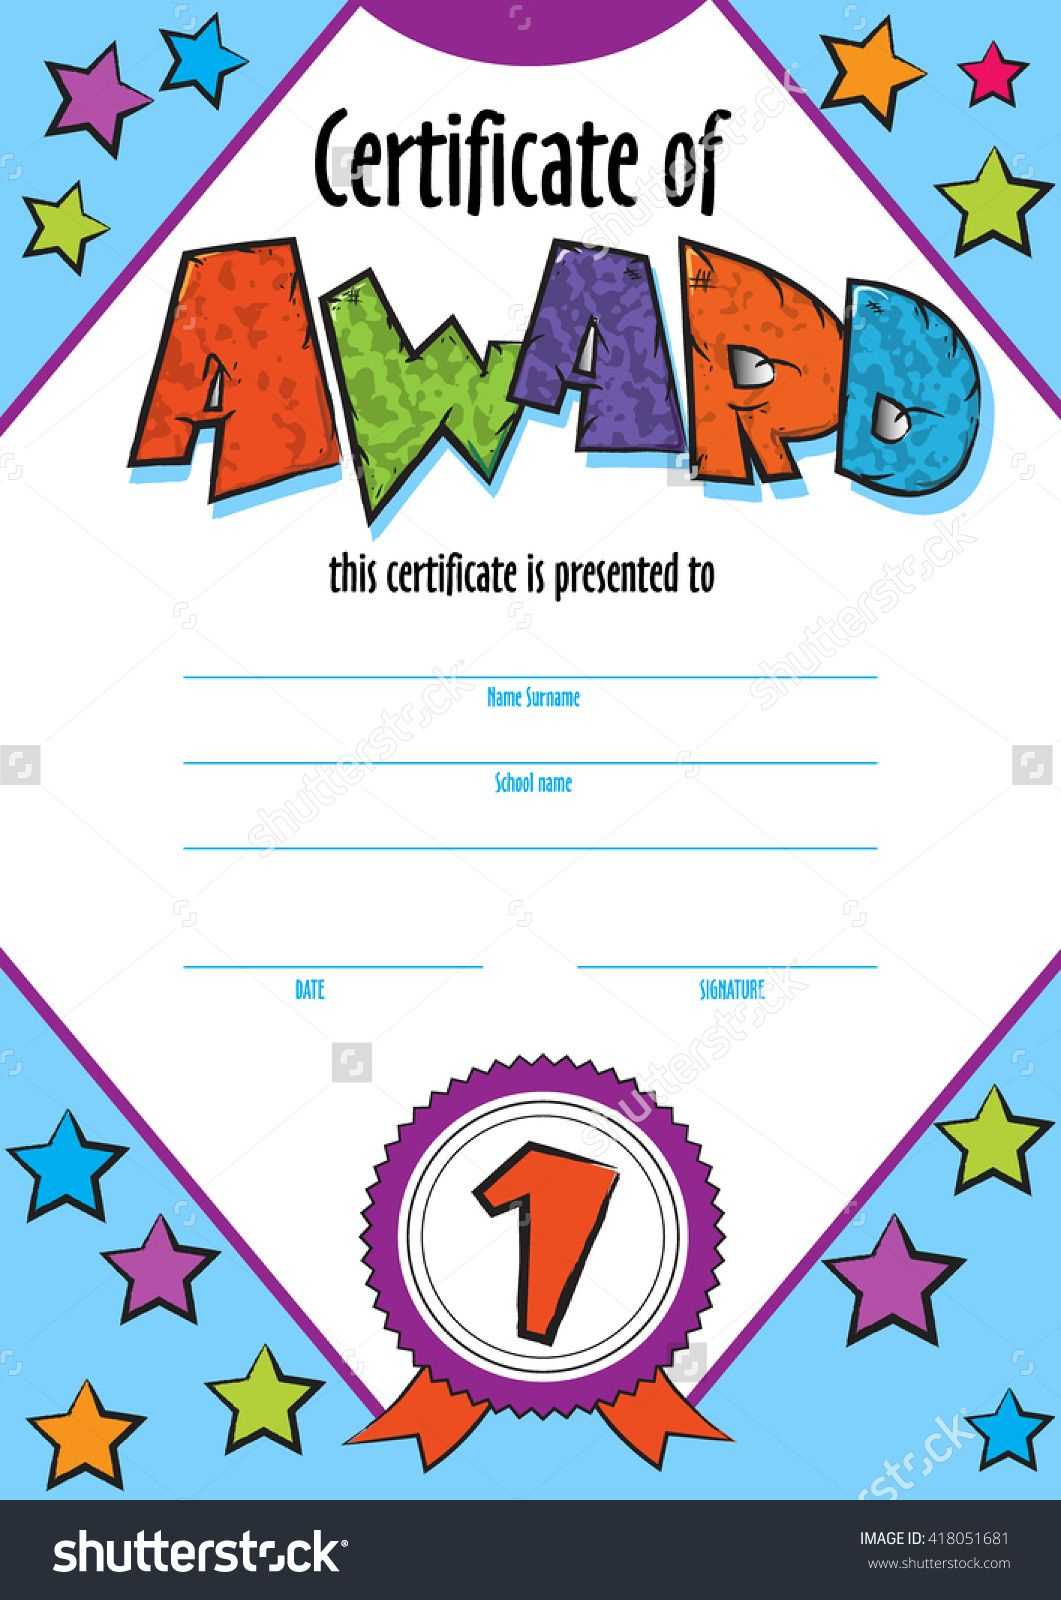 Template Child Certificate To Be Awarded. Kindergarten In Sports Day Certificate Templates Free